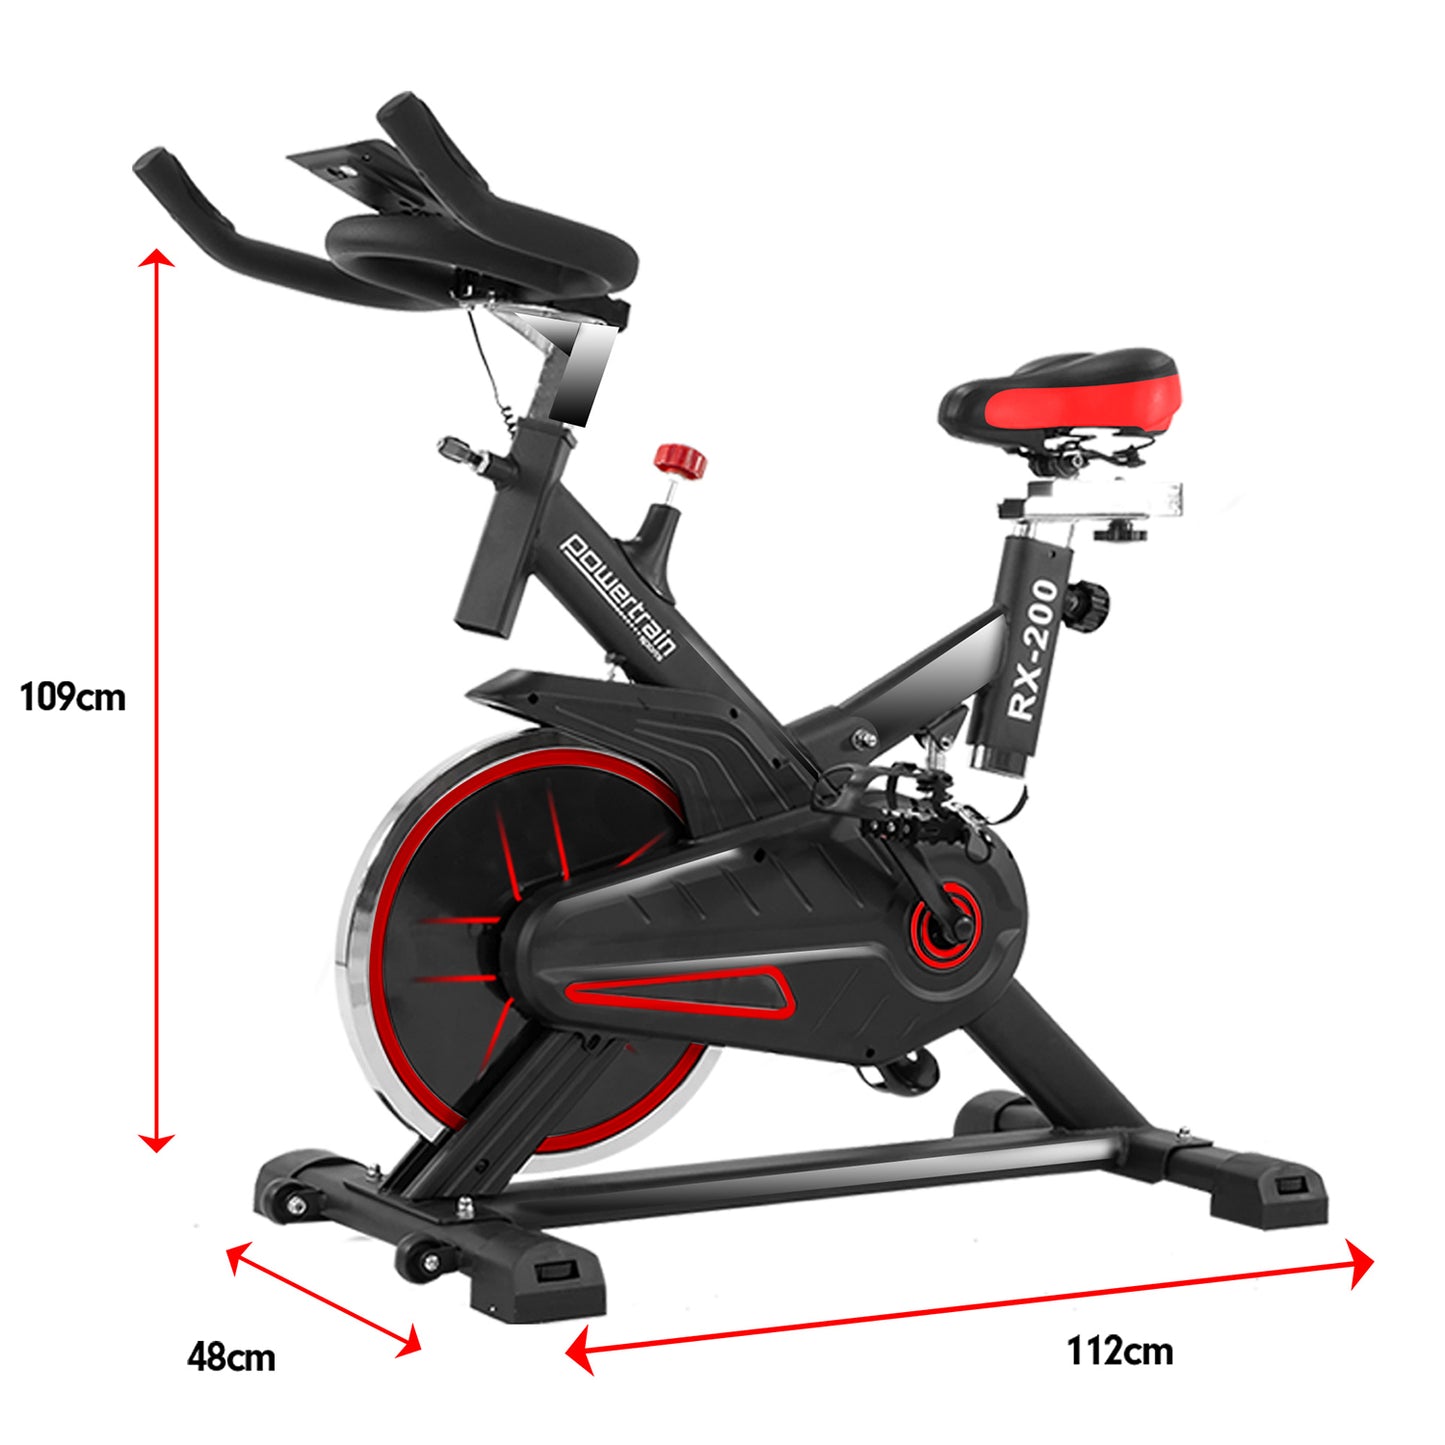 Powertrain RX-200 Exercise Spin Bike Cardio Cycling - Red